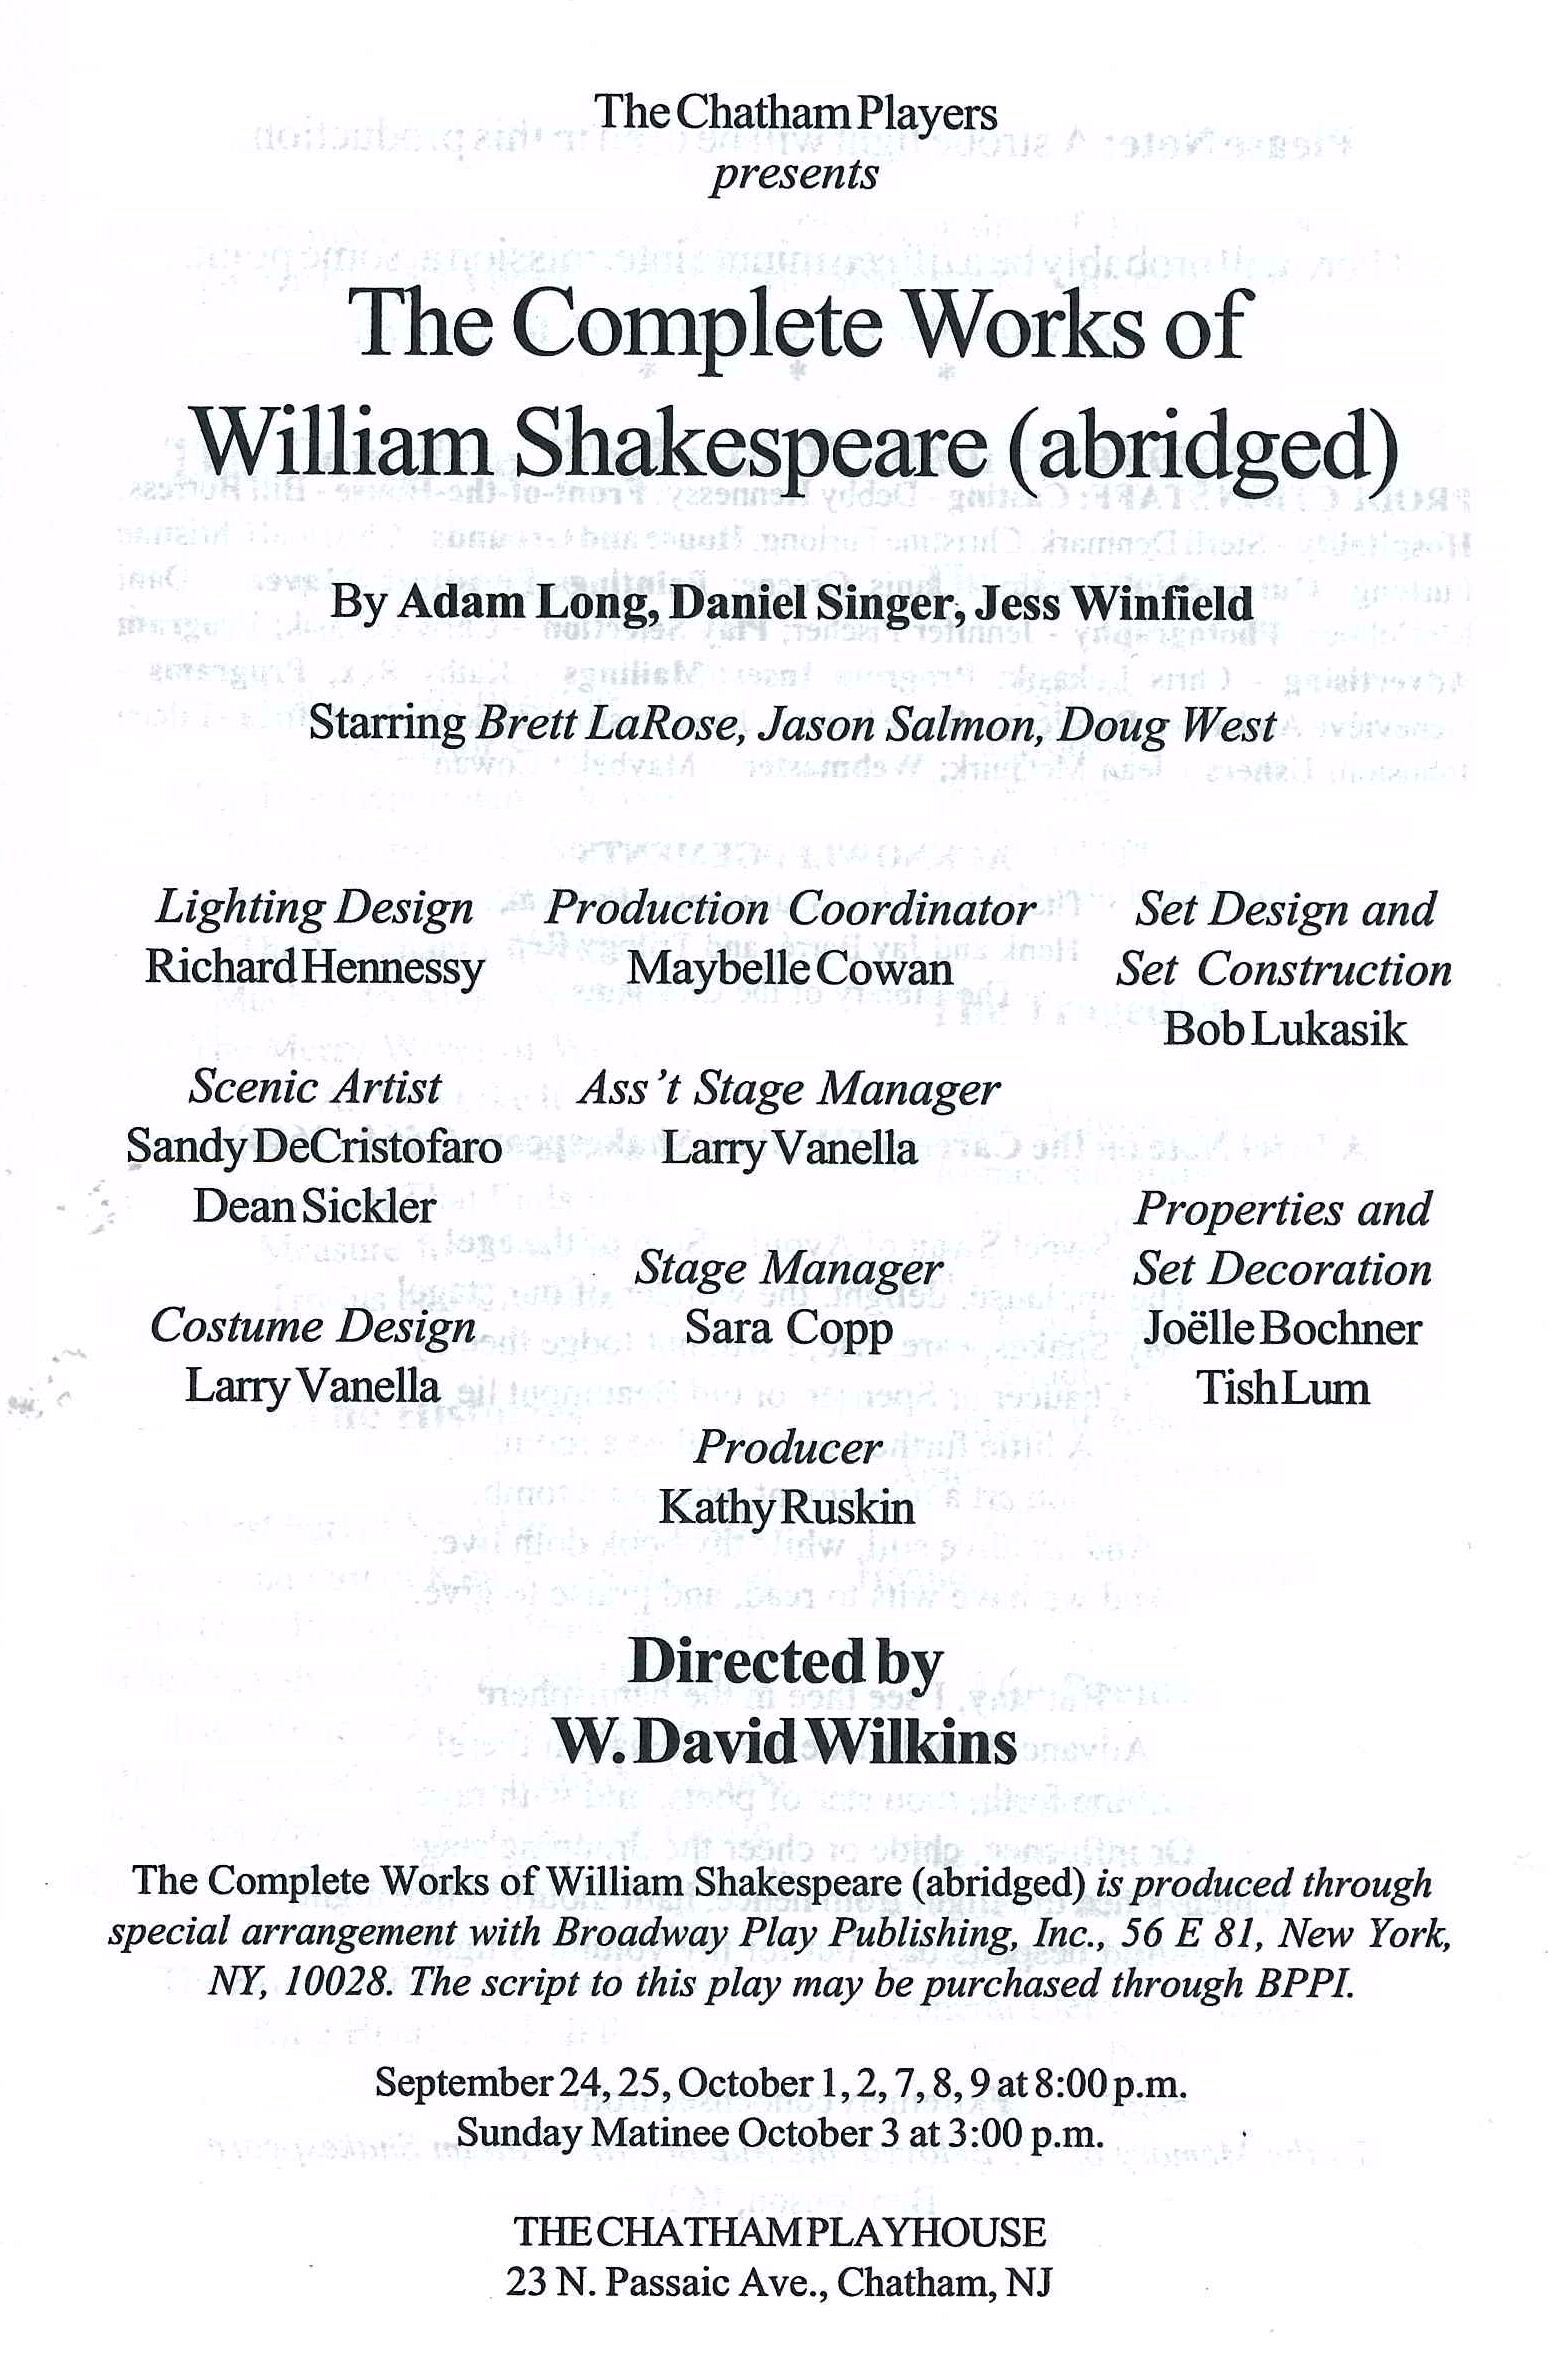 The Compleat Works of William Shakepeare Abridged (1999)